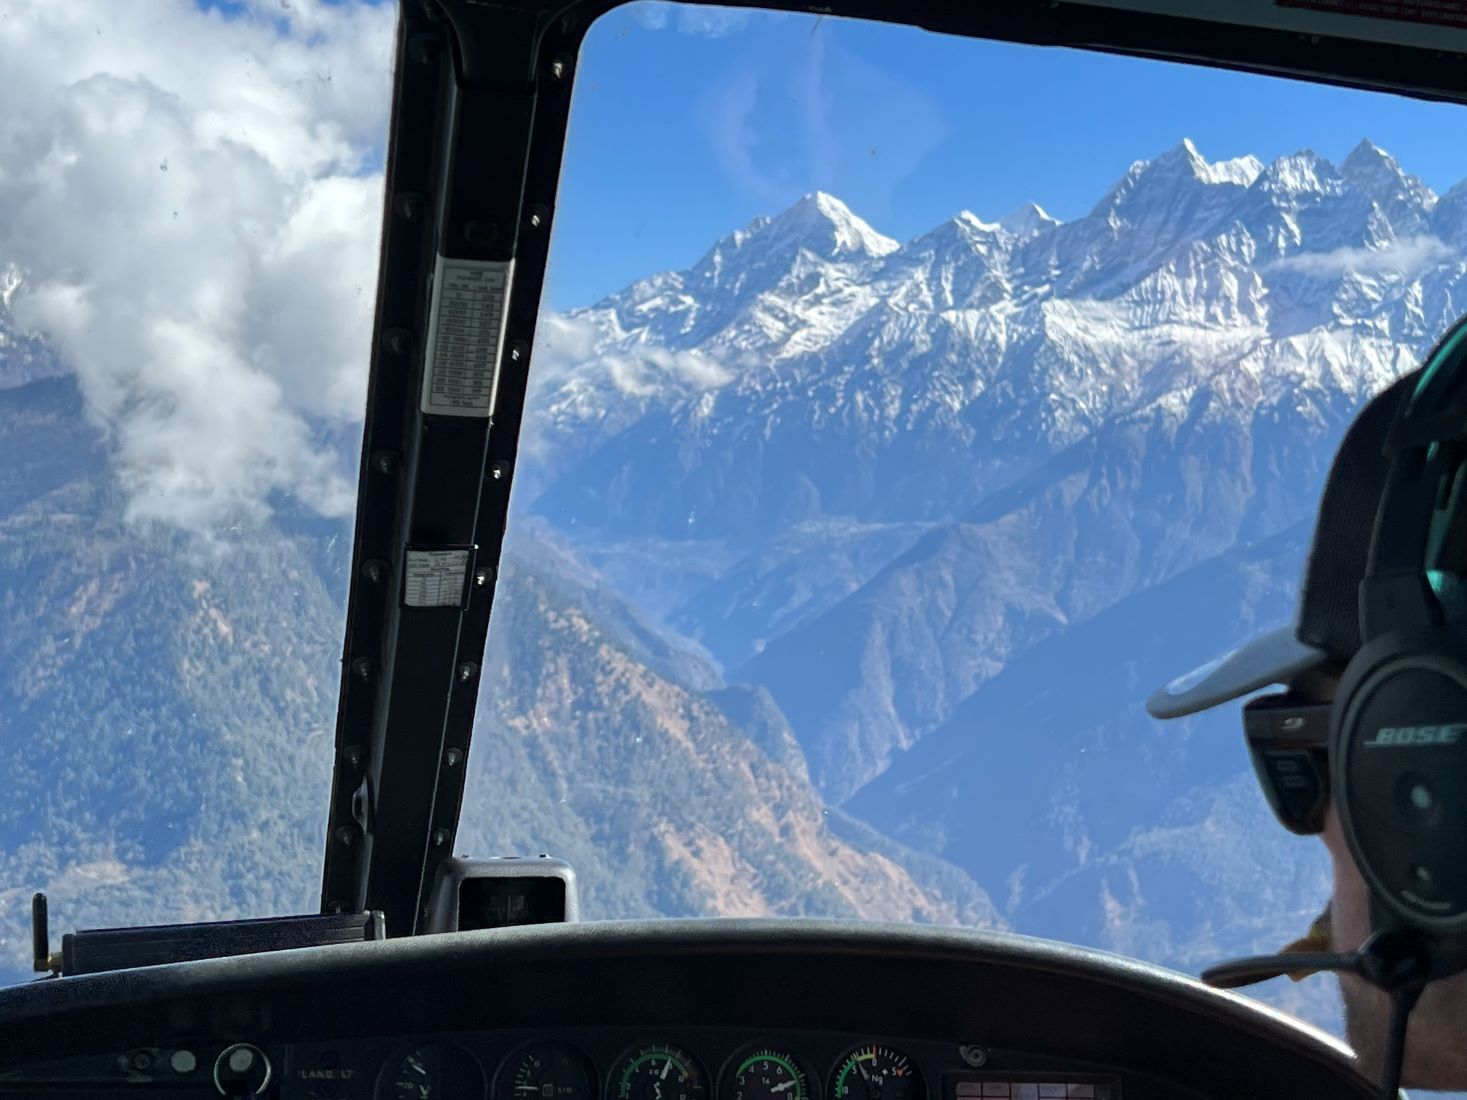 The Khumbu peaks first come in to view on the helicopter flight to Lukla from Kathmandu